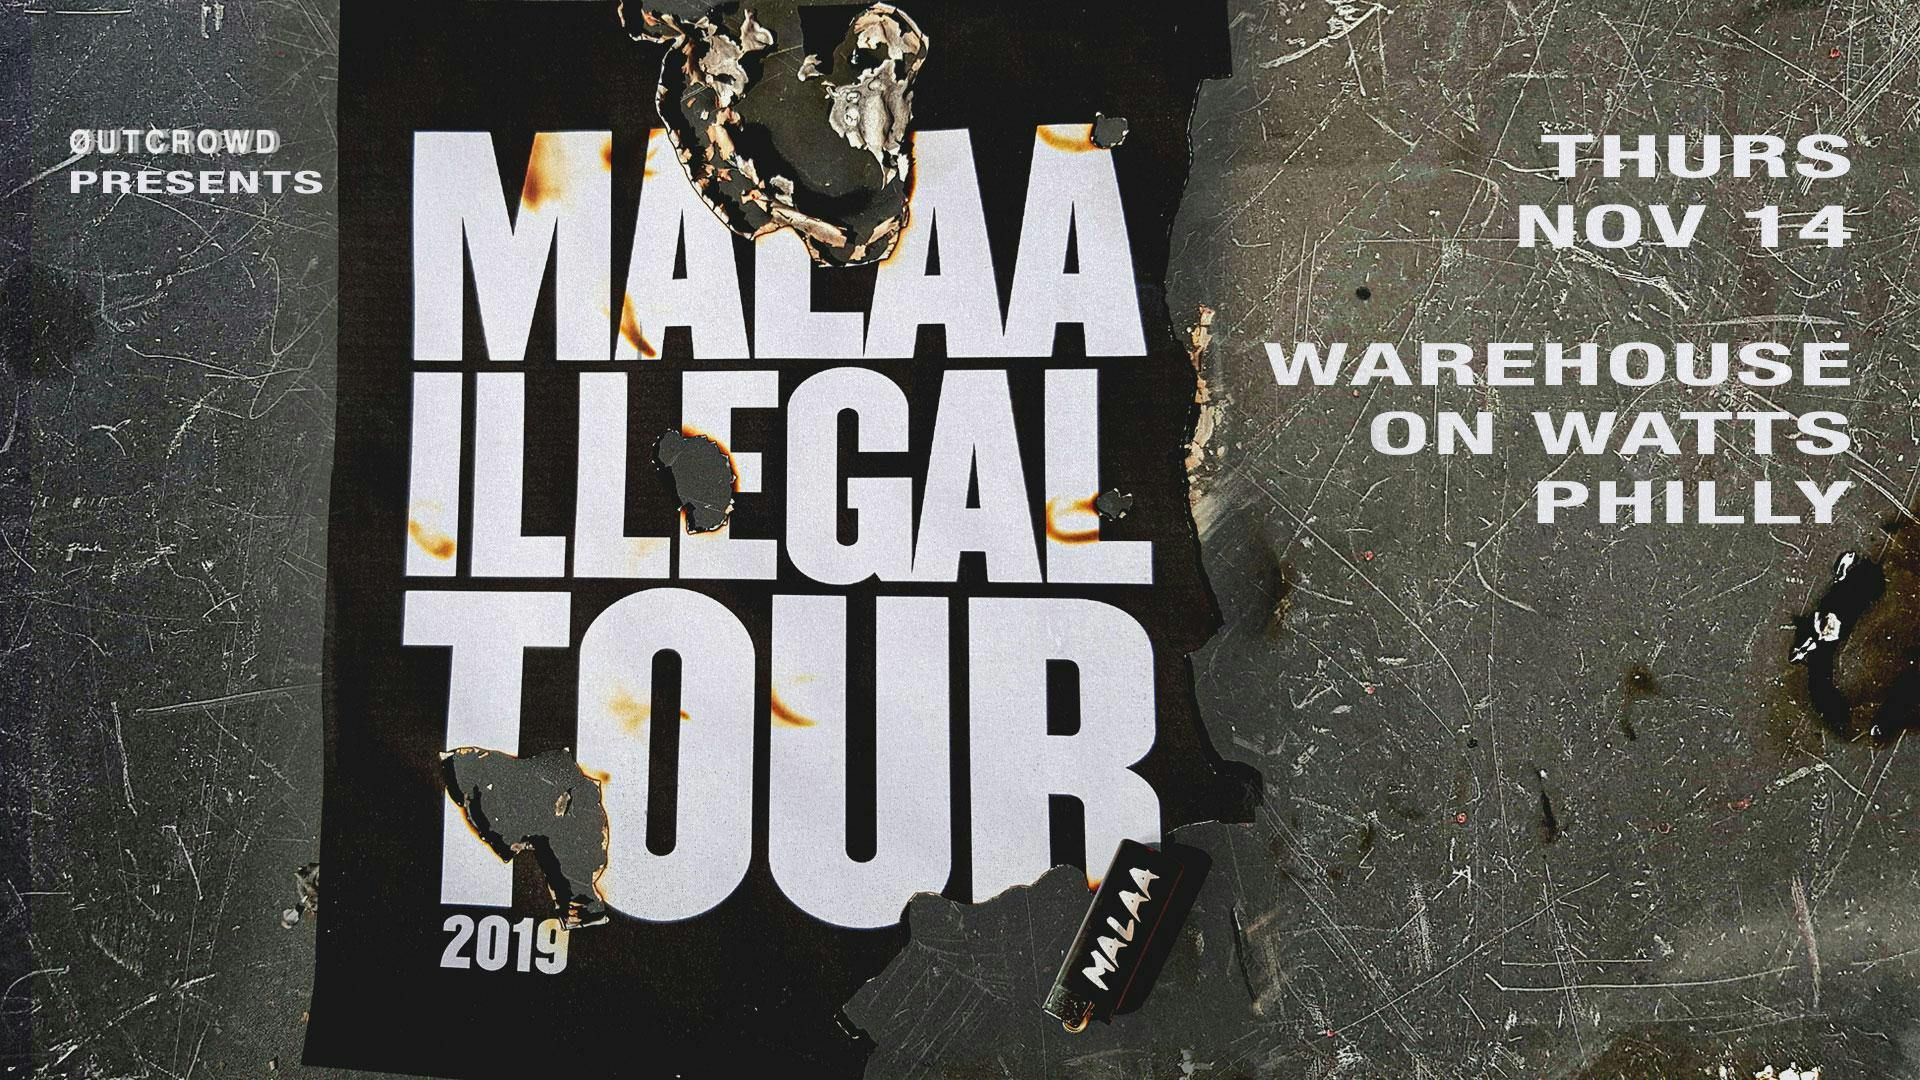 Outcrowd Pres Malaa Illegal Tour 2019 At Warehouse On Watts Images, Photos, Reviews